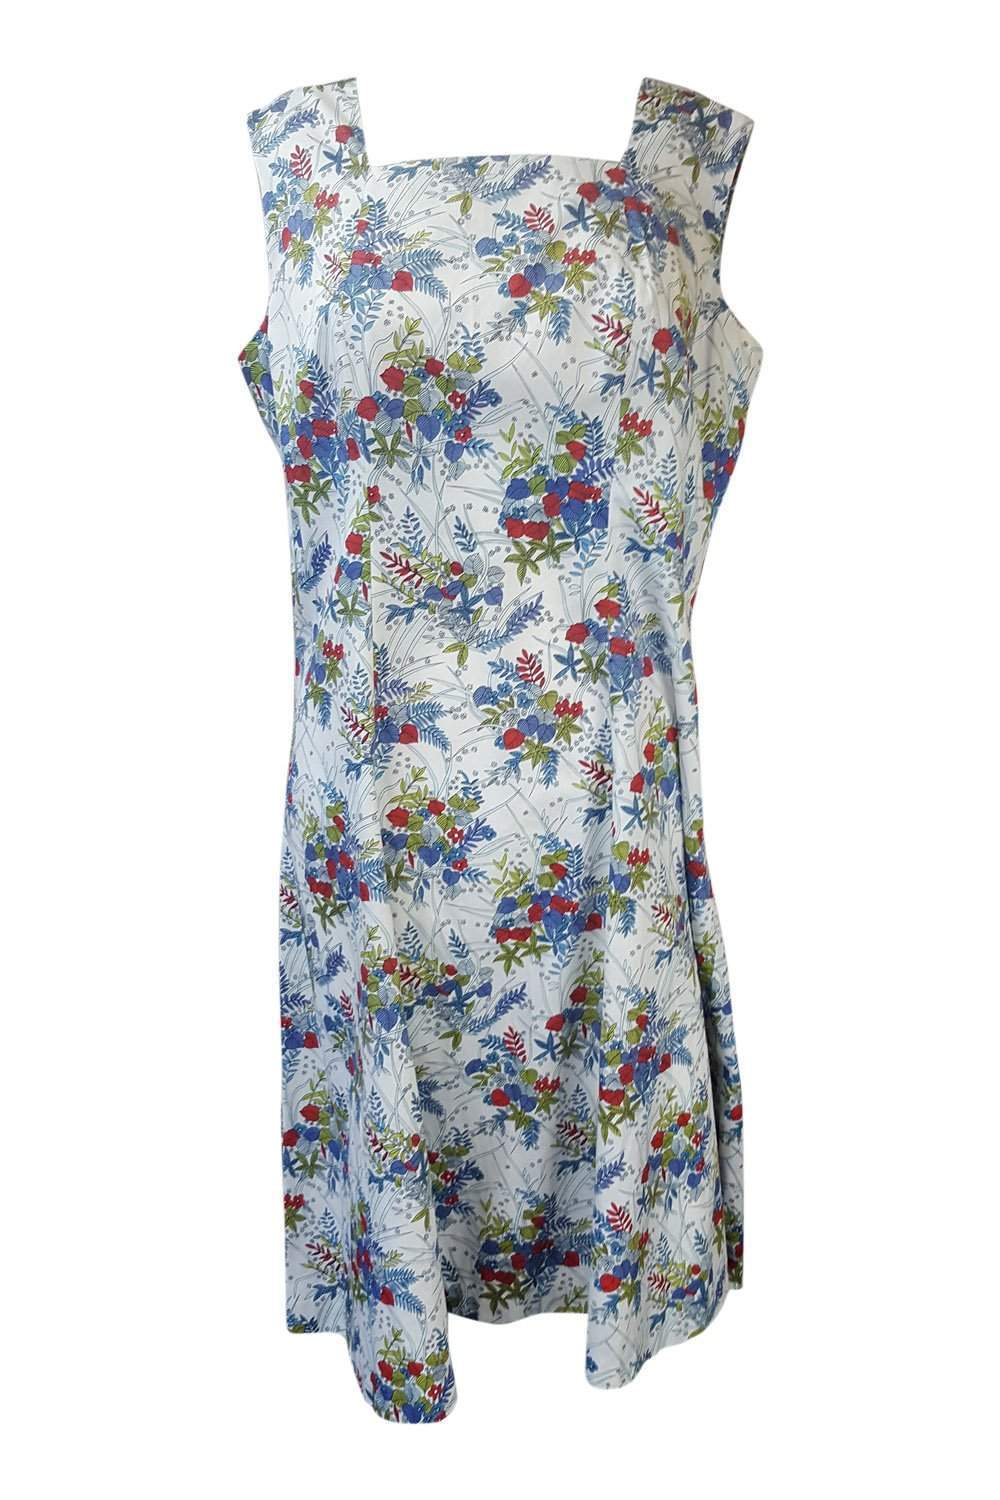 UNLABELLED Vintage 1950's Inspired Floral Sun Dress (L/M)-The Freperie-The Freperie